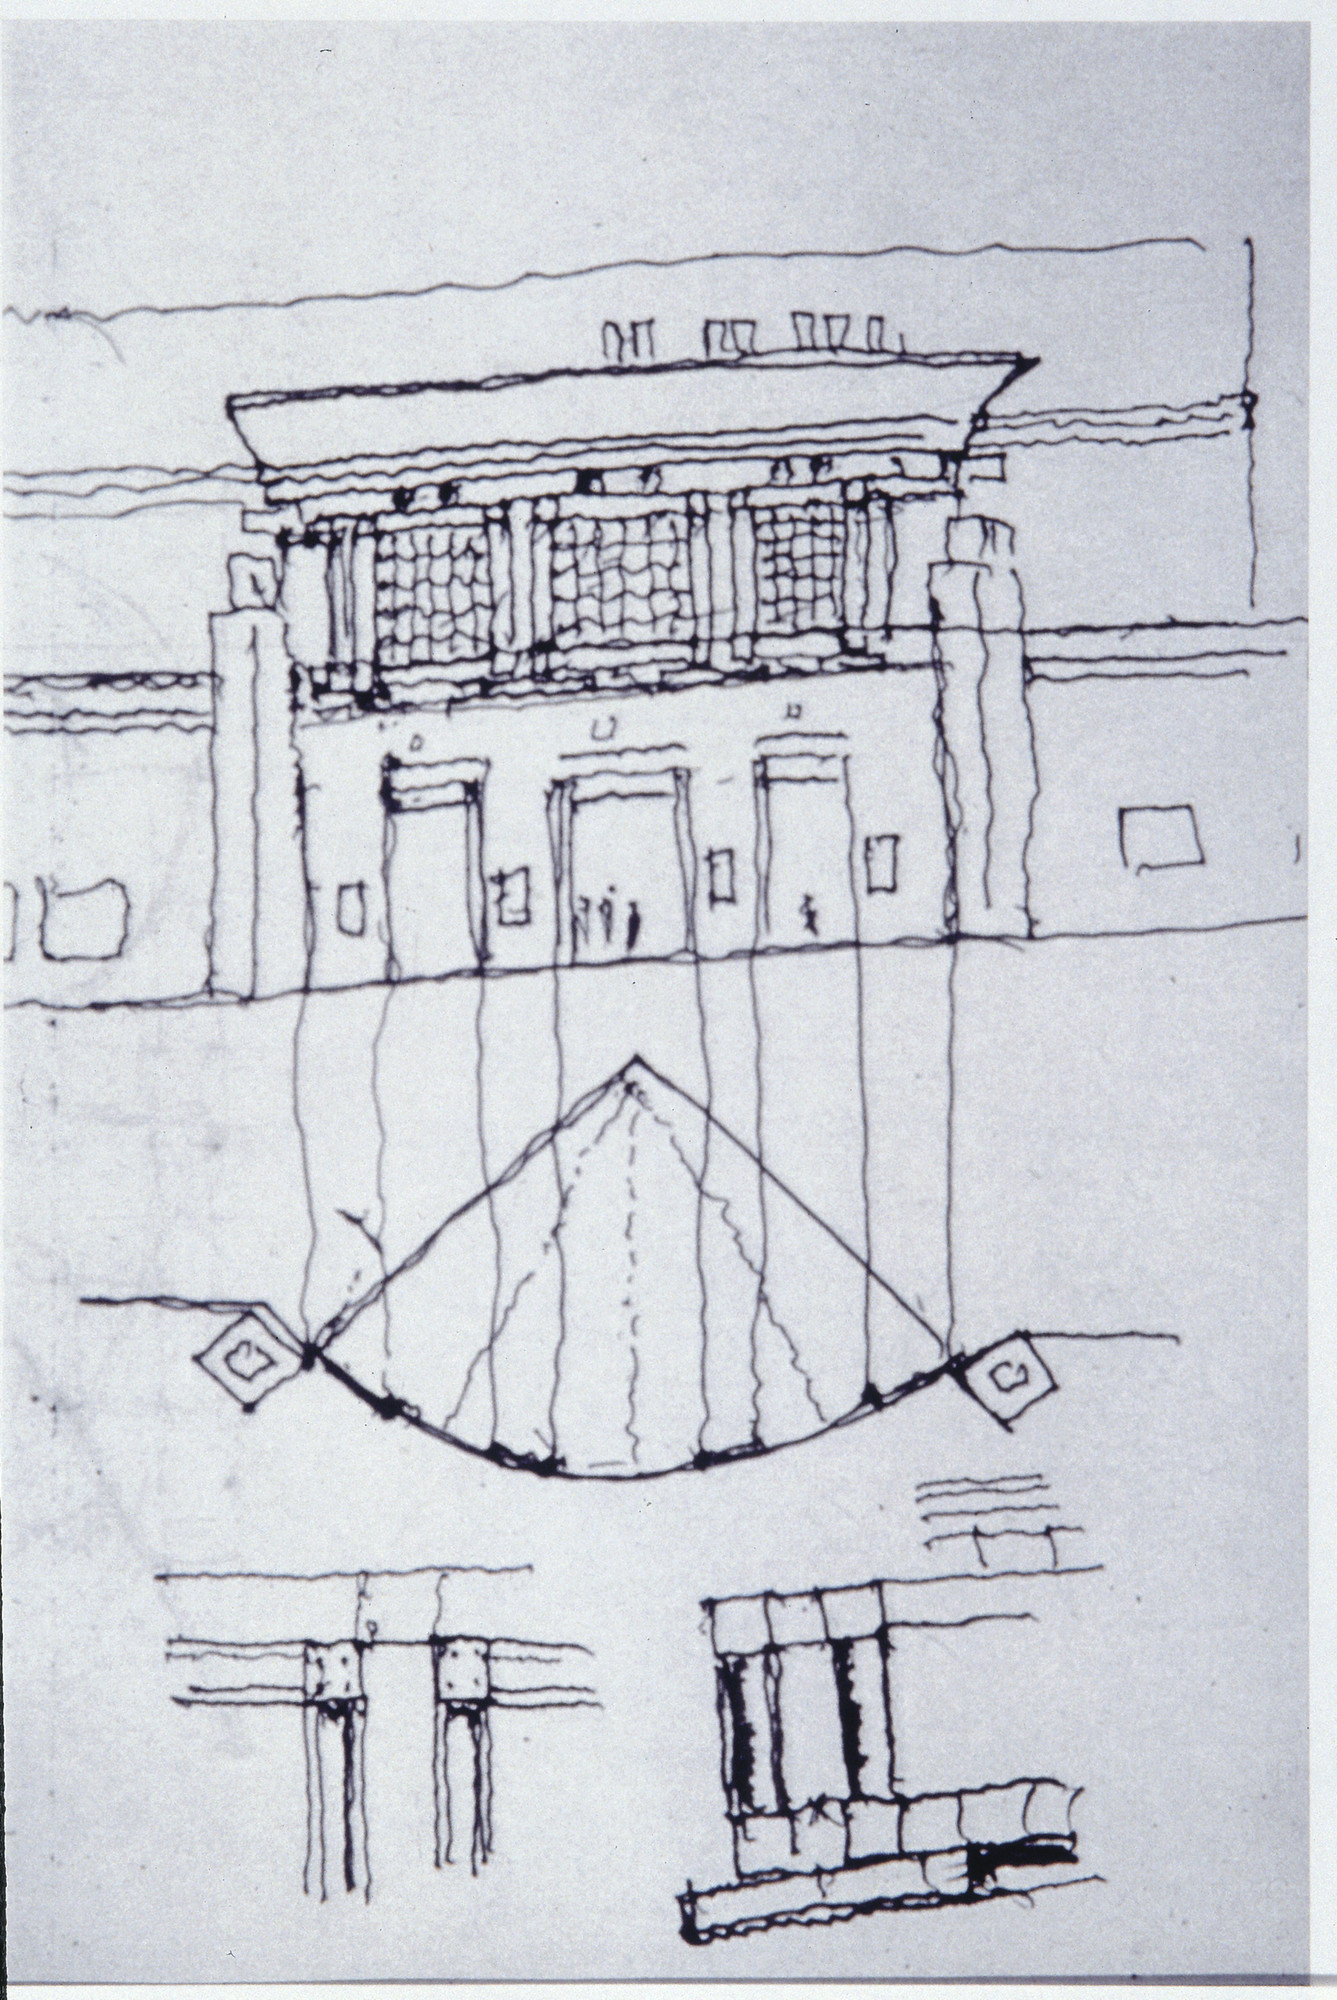 Sketch of the U.S. Holocaust Memorial Museum building by the museum's architect, James Ingo Freed.